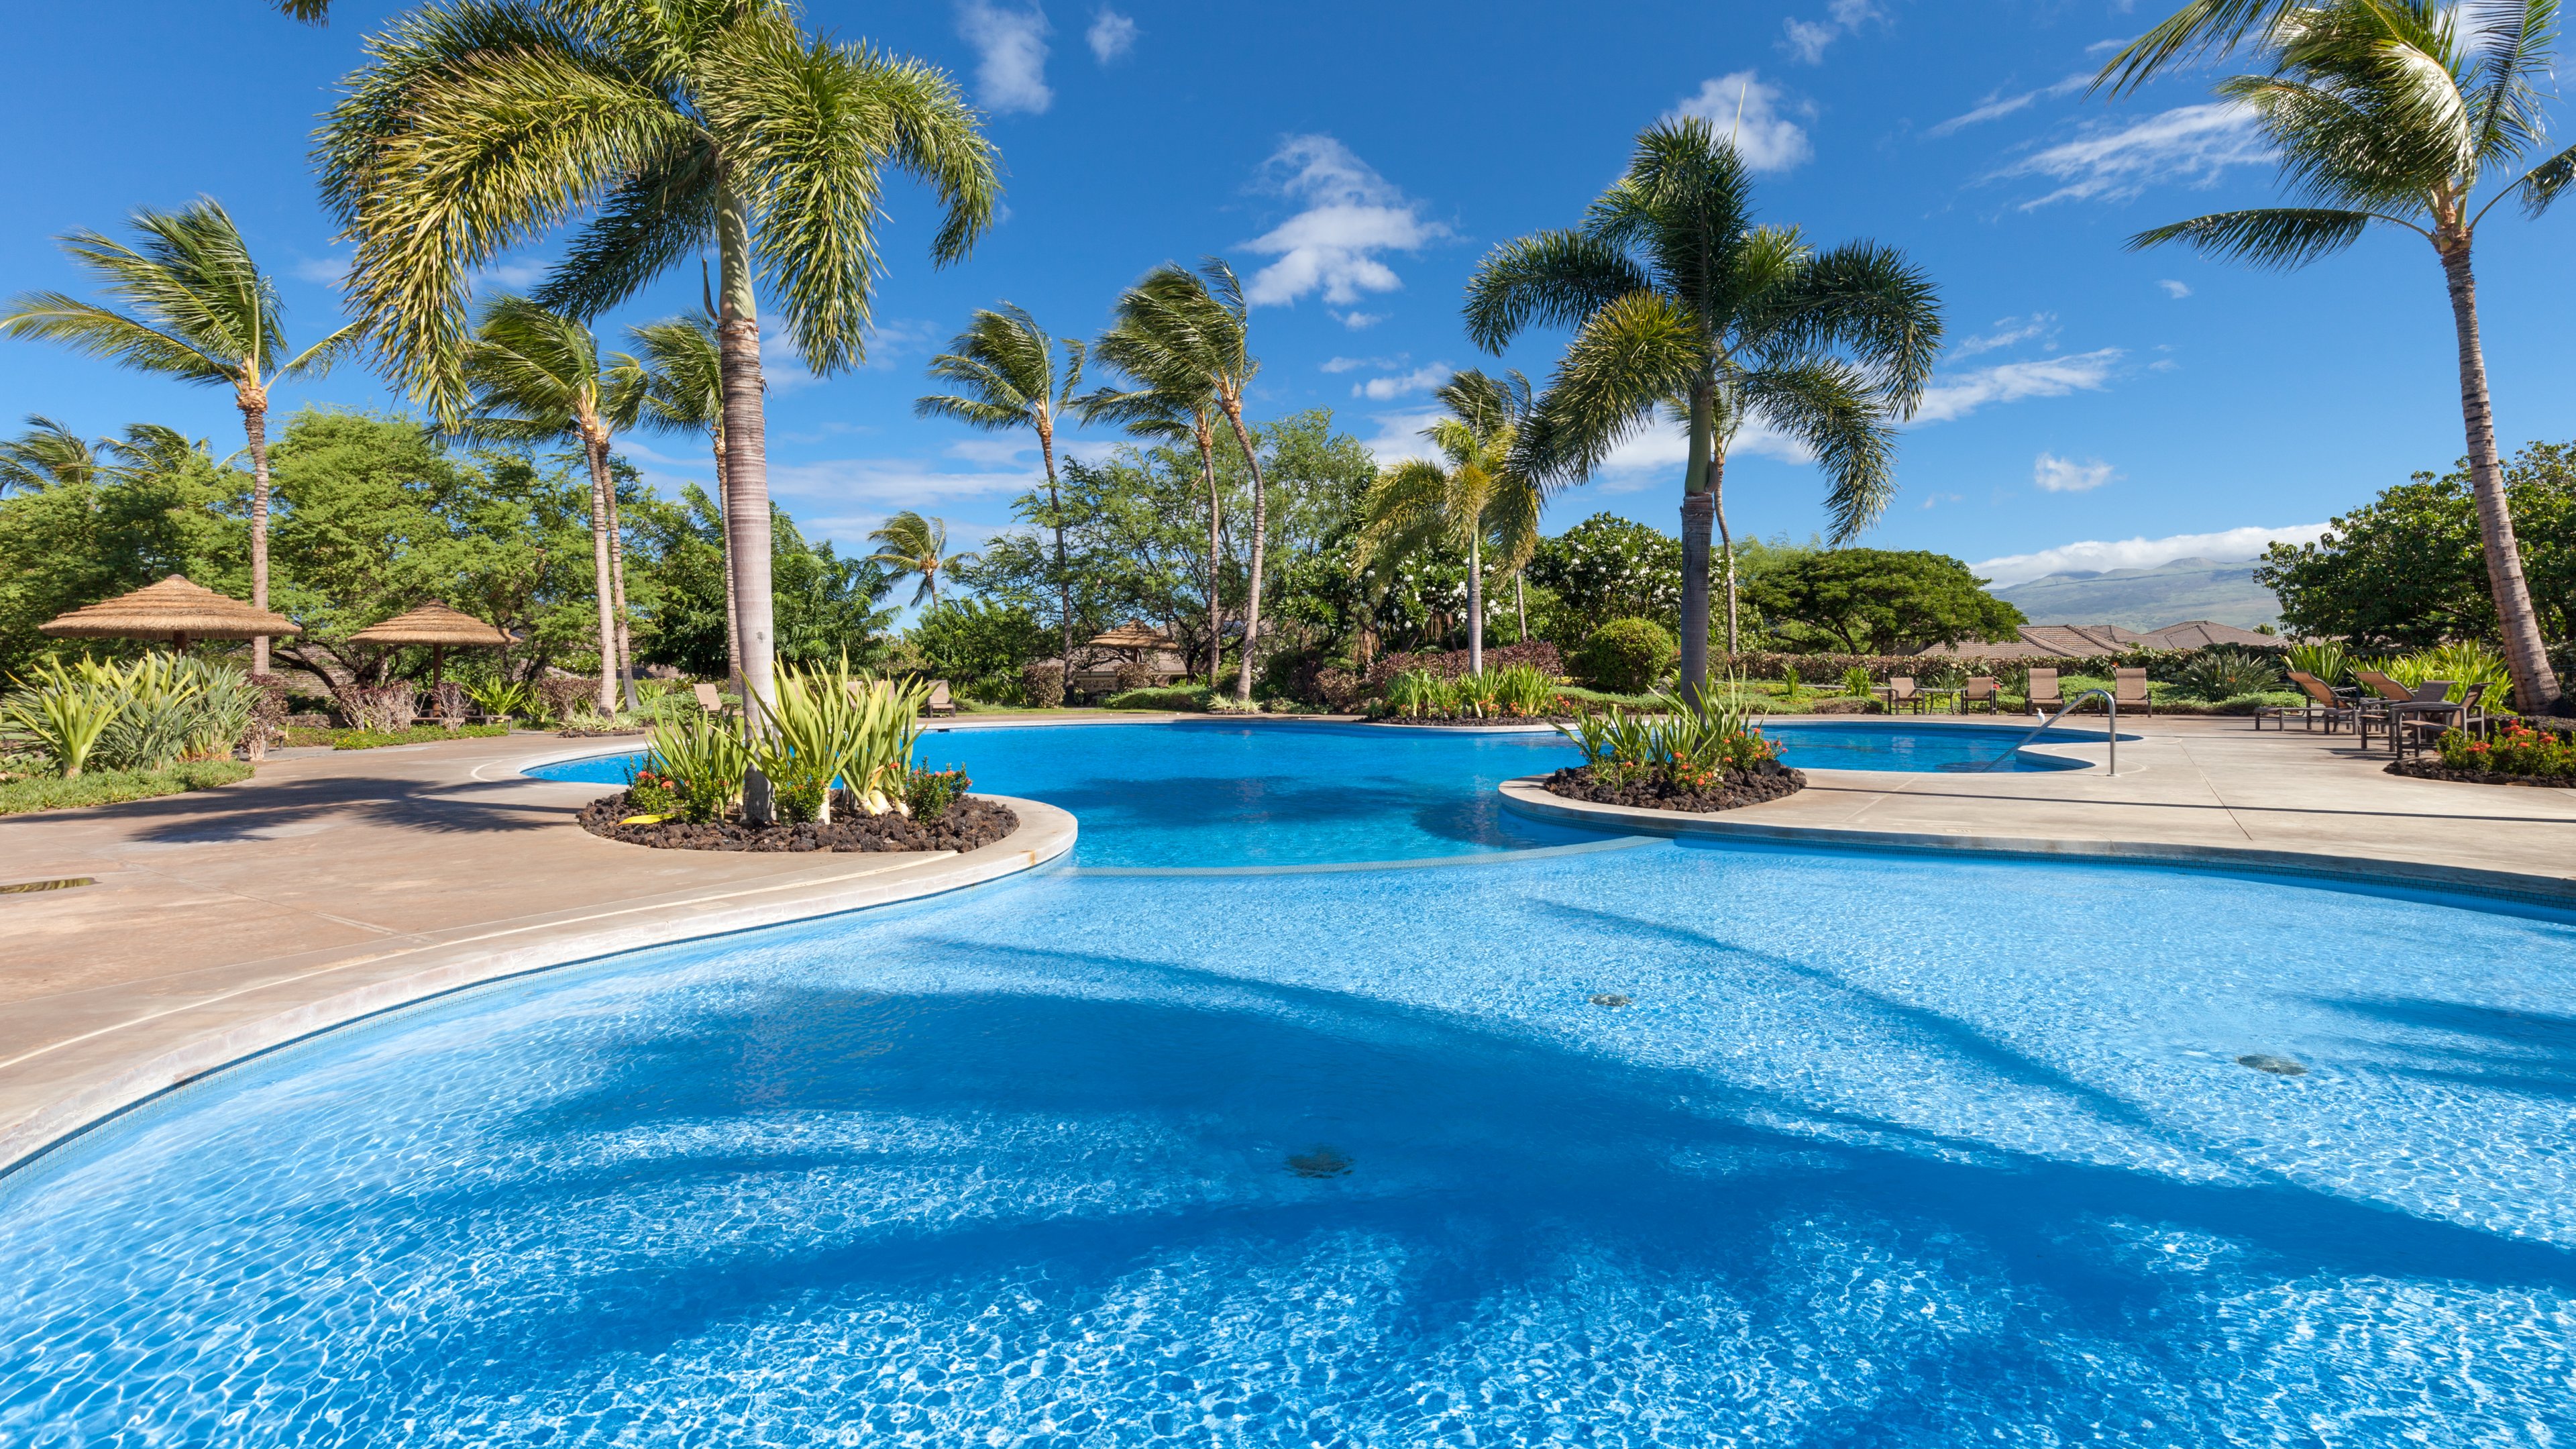 KaMilo has one of the best pool and fitness complexes on the Island.